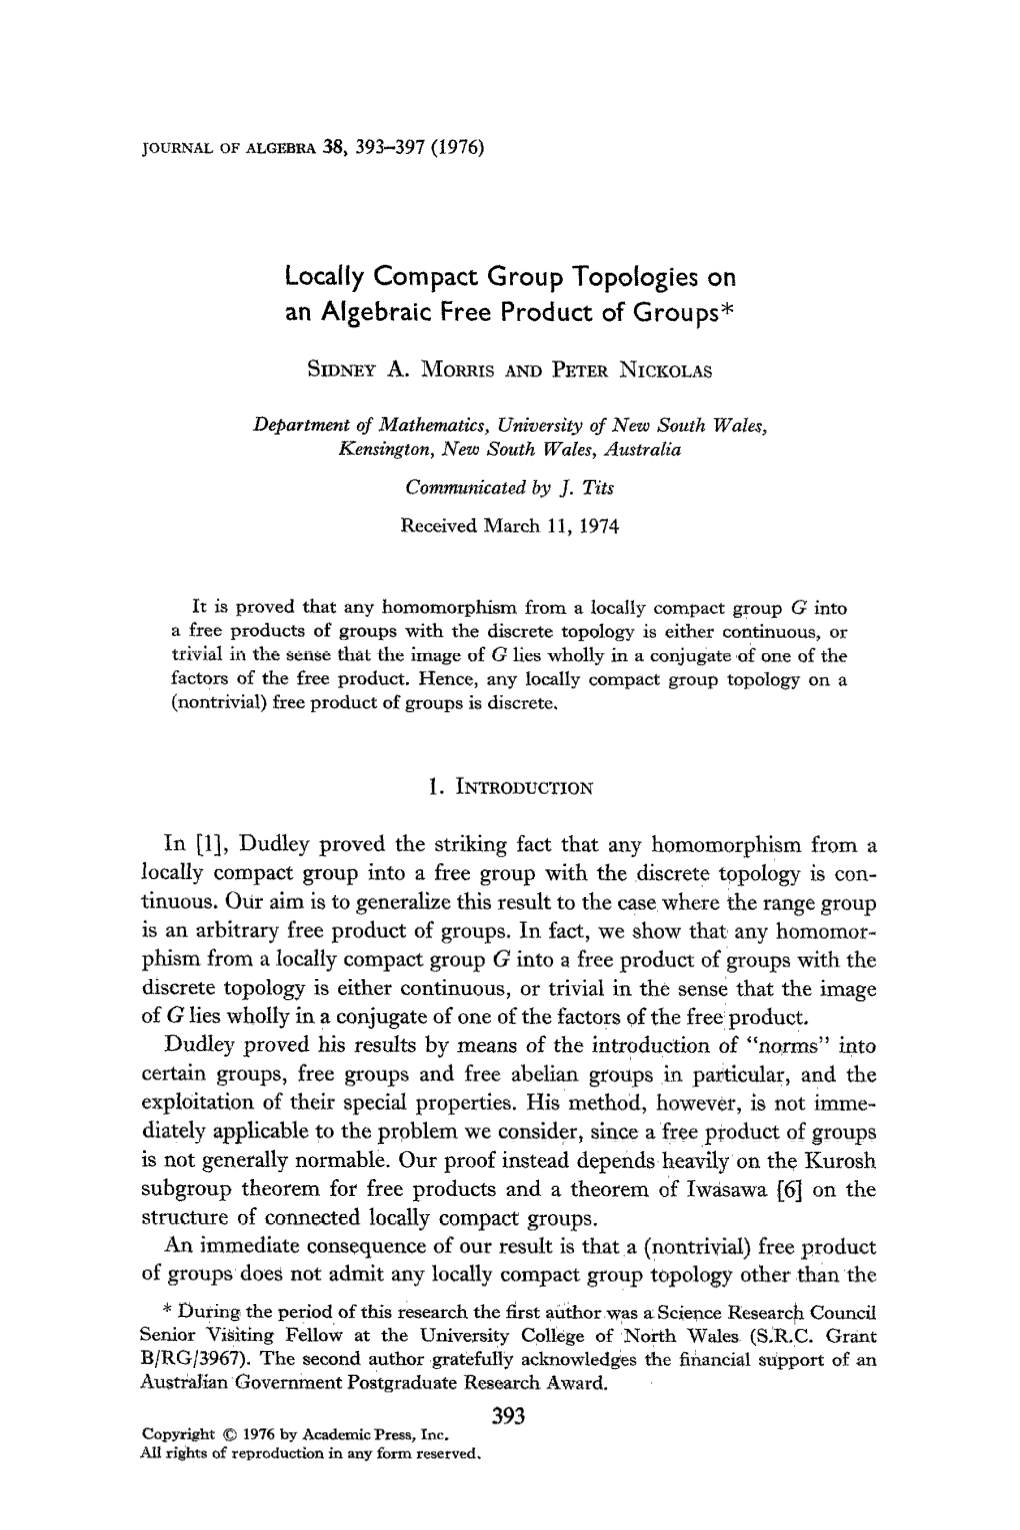 Locally Compact Group Topofogies on an Algebraic Free Product of Groups*